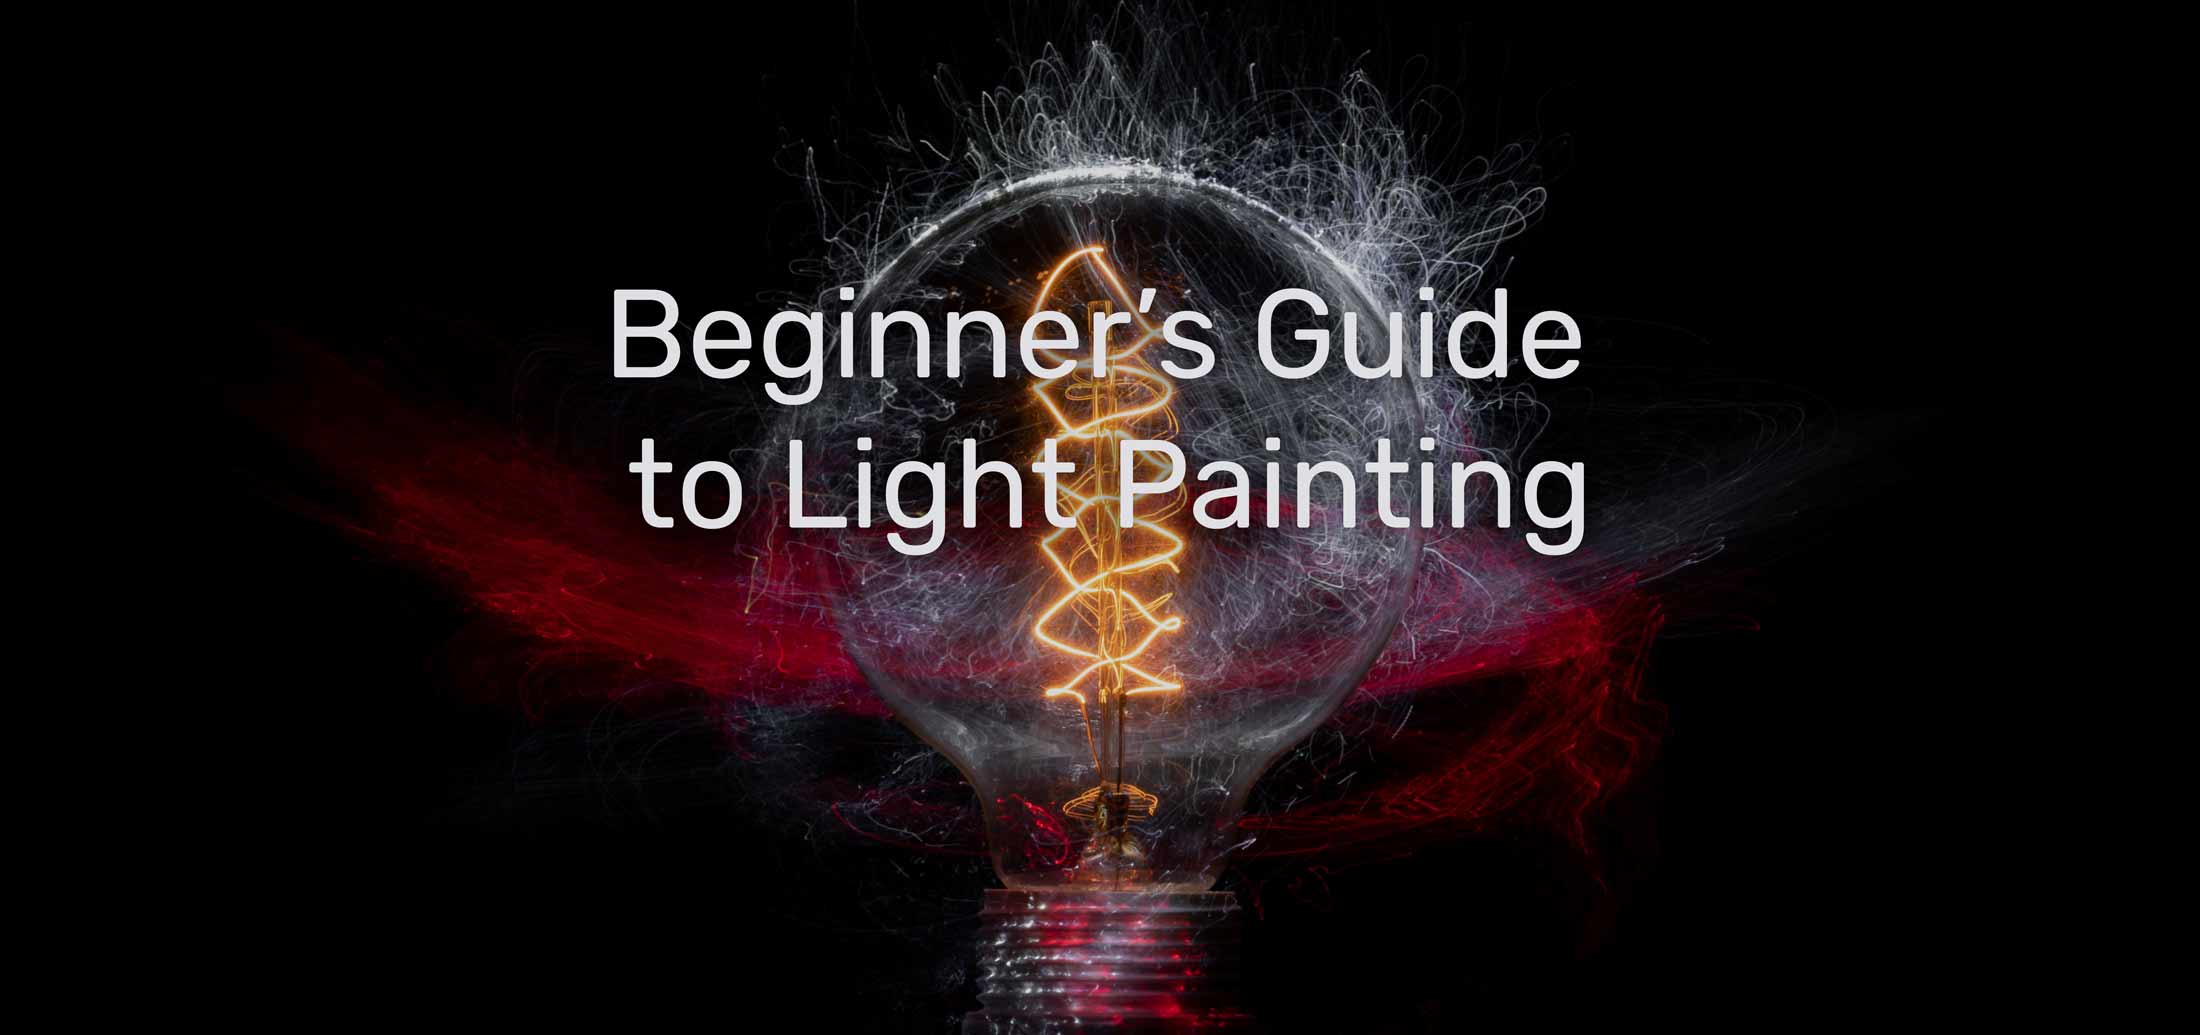 A beginner's guide to painting and drawing